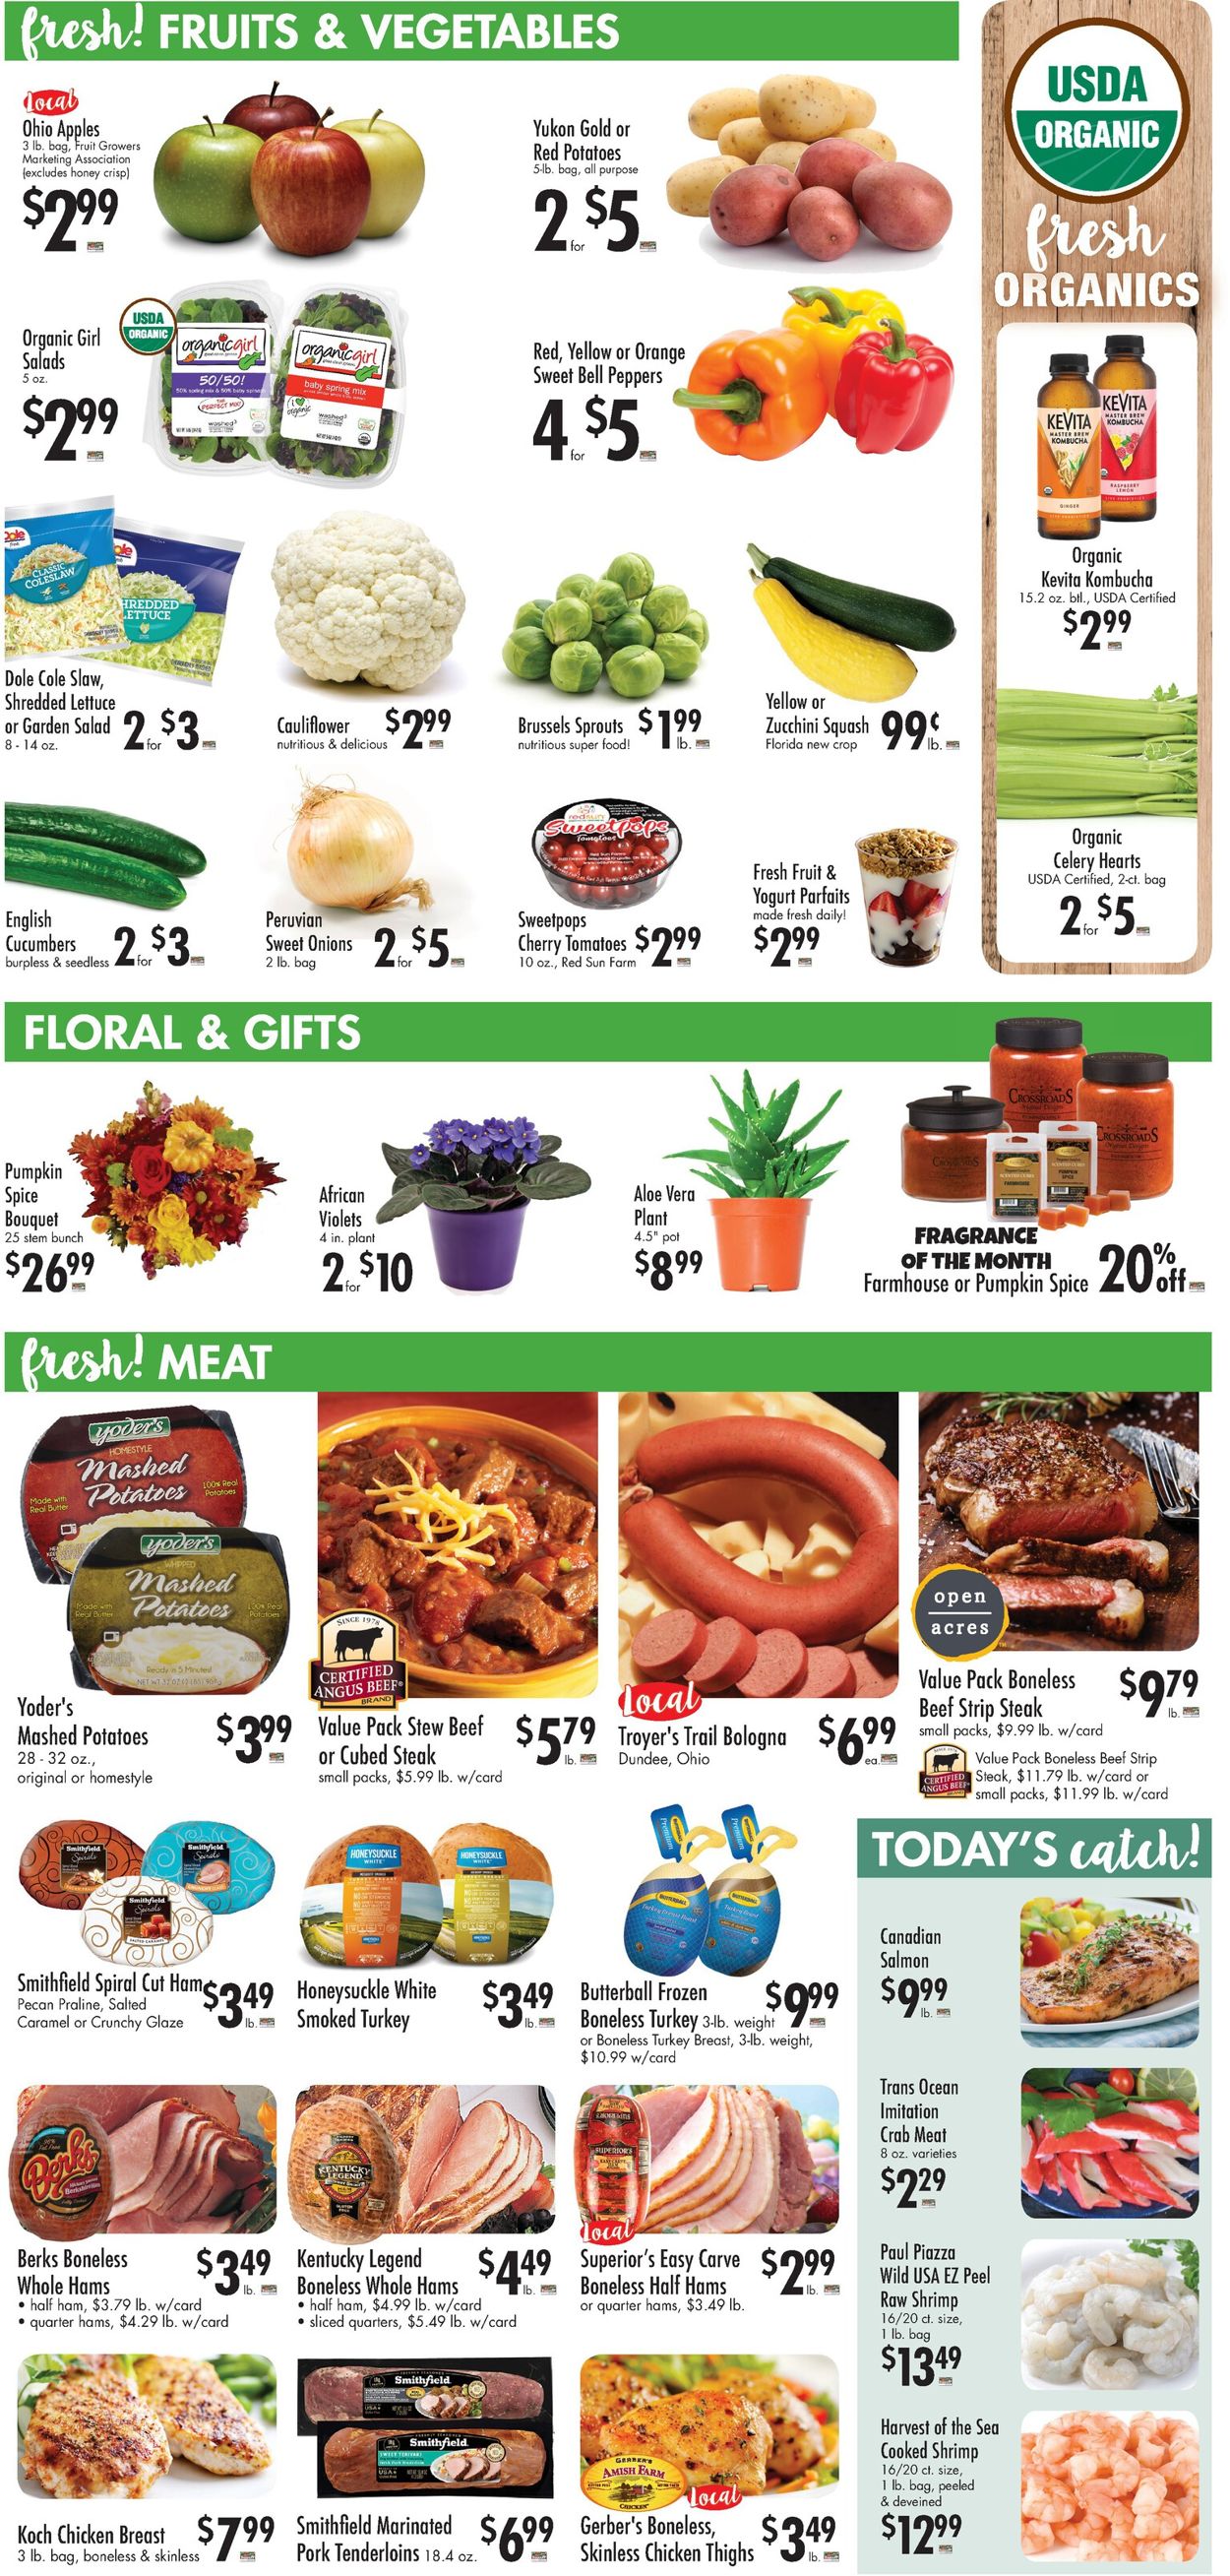 Catalogue Buehler's Fresh Foods from 11/04/2020